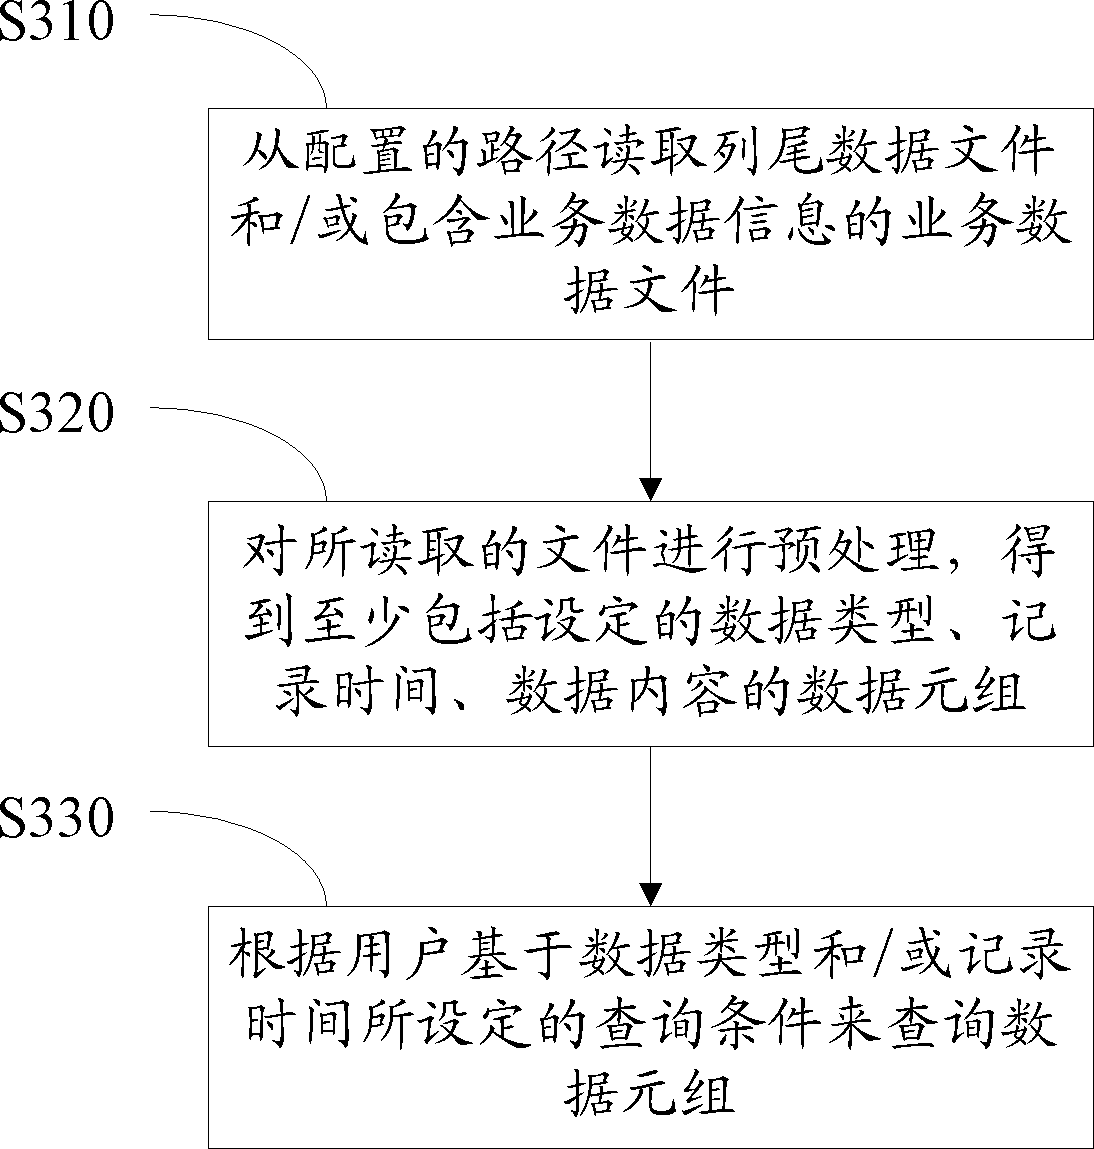 Device and method for analyzing data in GSM-R (Global System for Mobile Communications for Railway) system